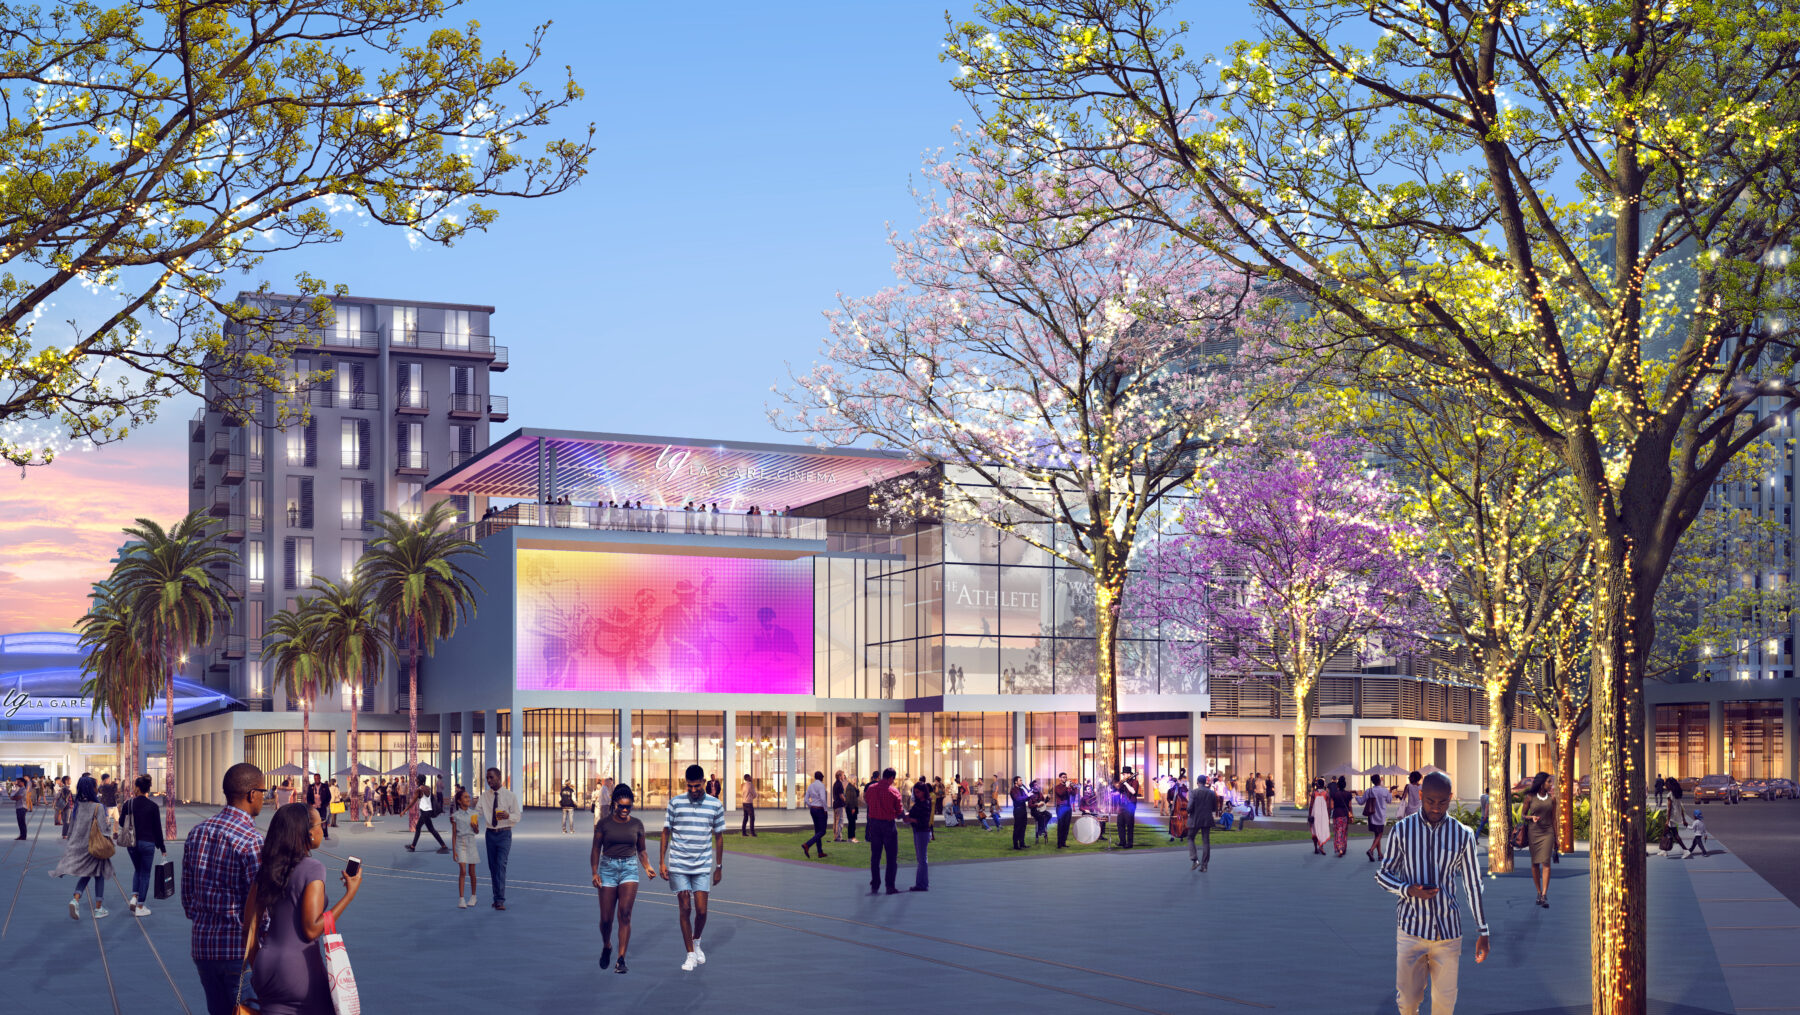 rendering of retail center offering contemporary architectural structures and nighttime activities